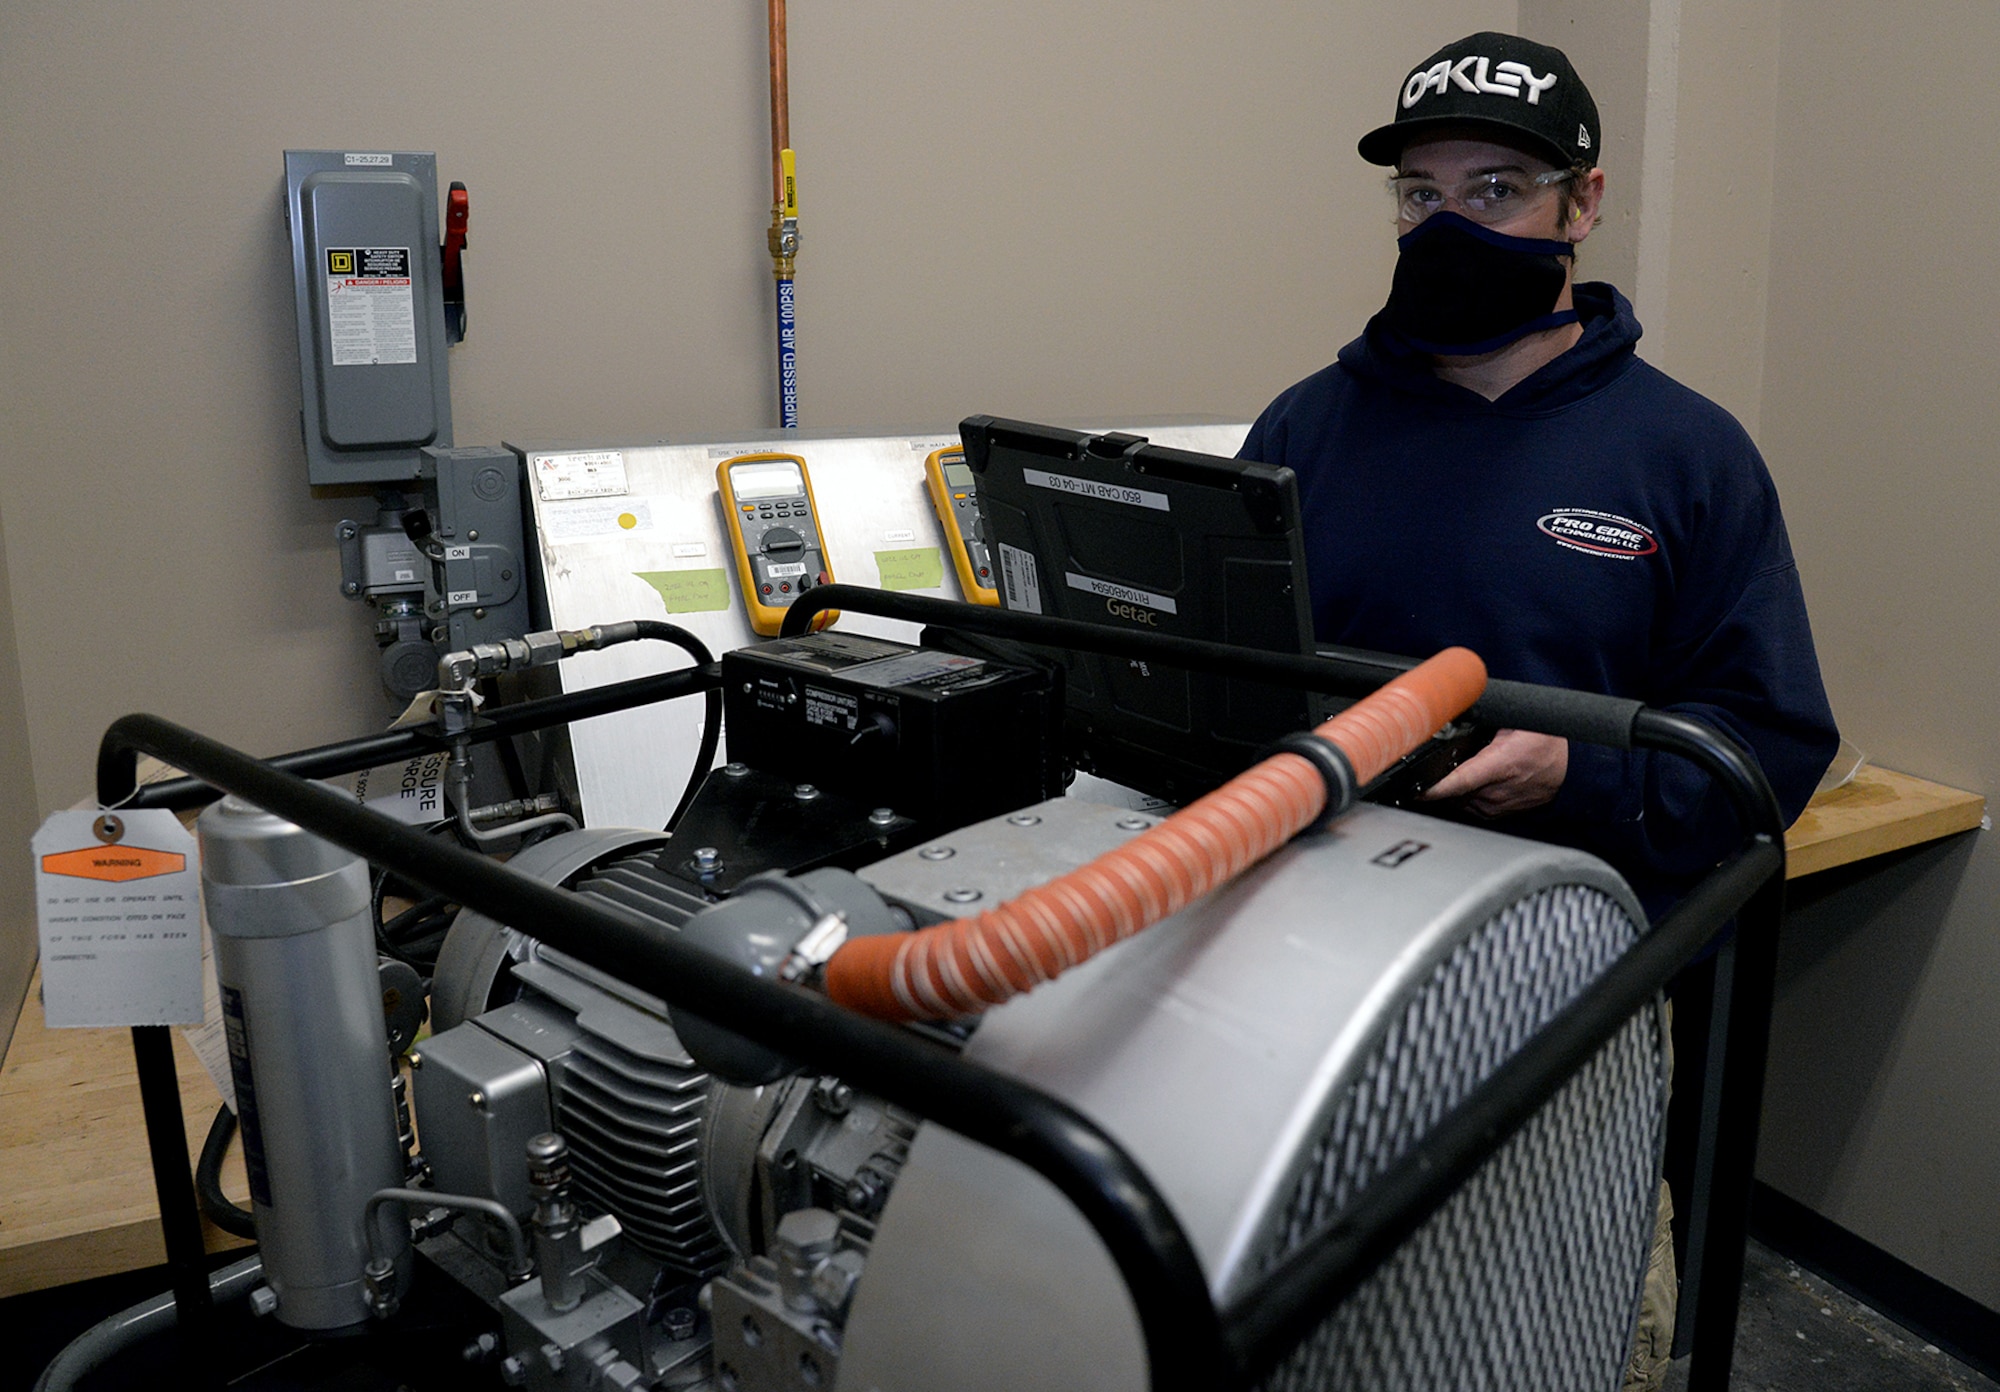 Skylar Cleveland, 581 Missile Maintenance Squadron powered support system mechanic, checks test results while performing a 4-hour run test during periodic depot maintenance on a shock isolator air compressor on Apr. 28, 2020, at Hill Air Force Base, Utah.